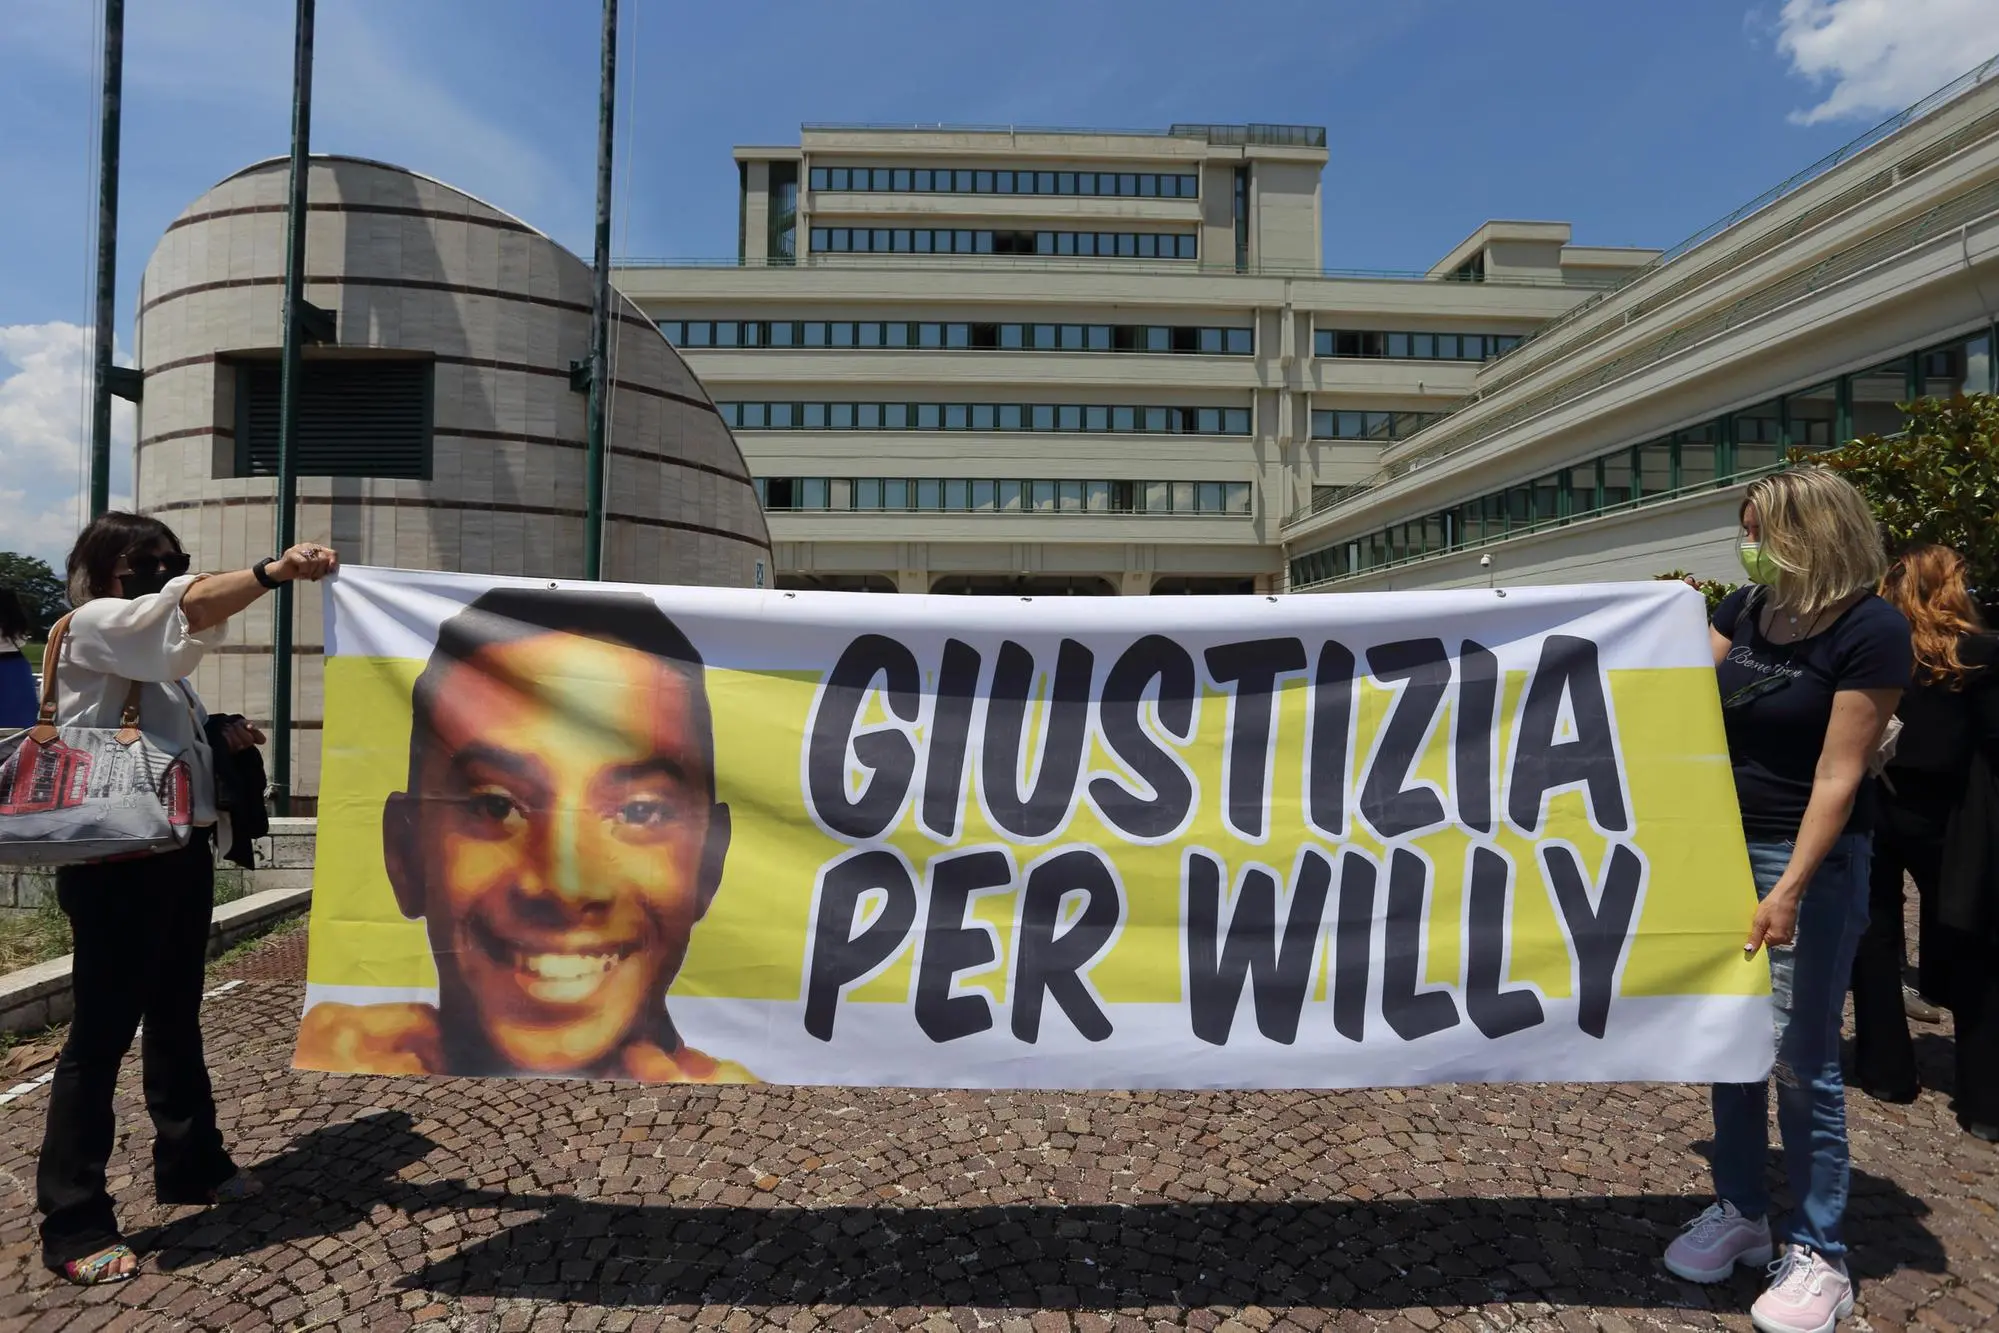 A banner calling for justice for Willy Monteiro Duarte (Ansa)